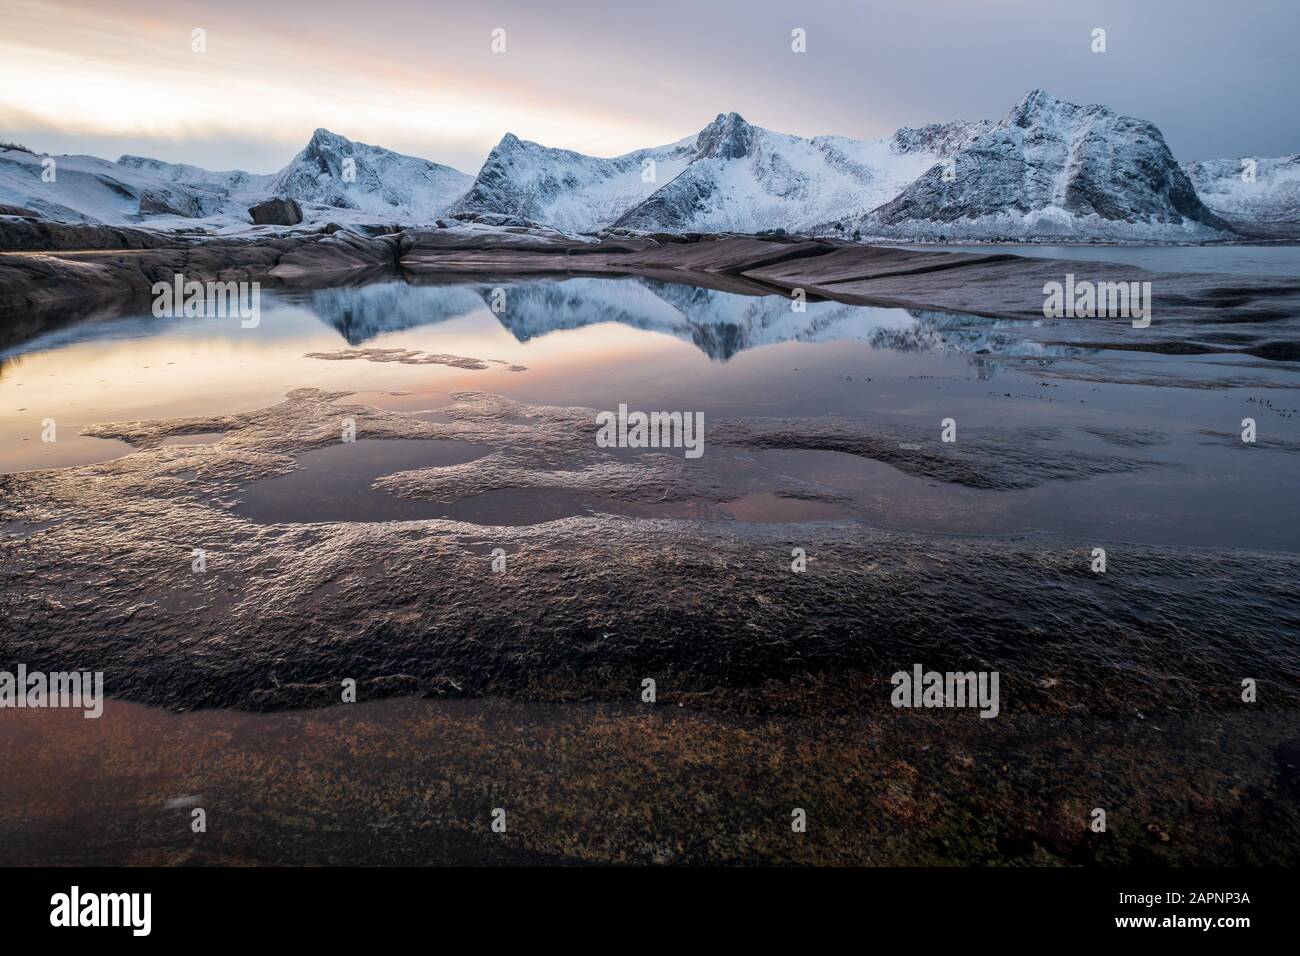 View over rockpool to snowy mountain range in evening light with beautiful reflections, Cape Tungeneset, Ersfjord, Senja, Norway Stock Photo